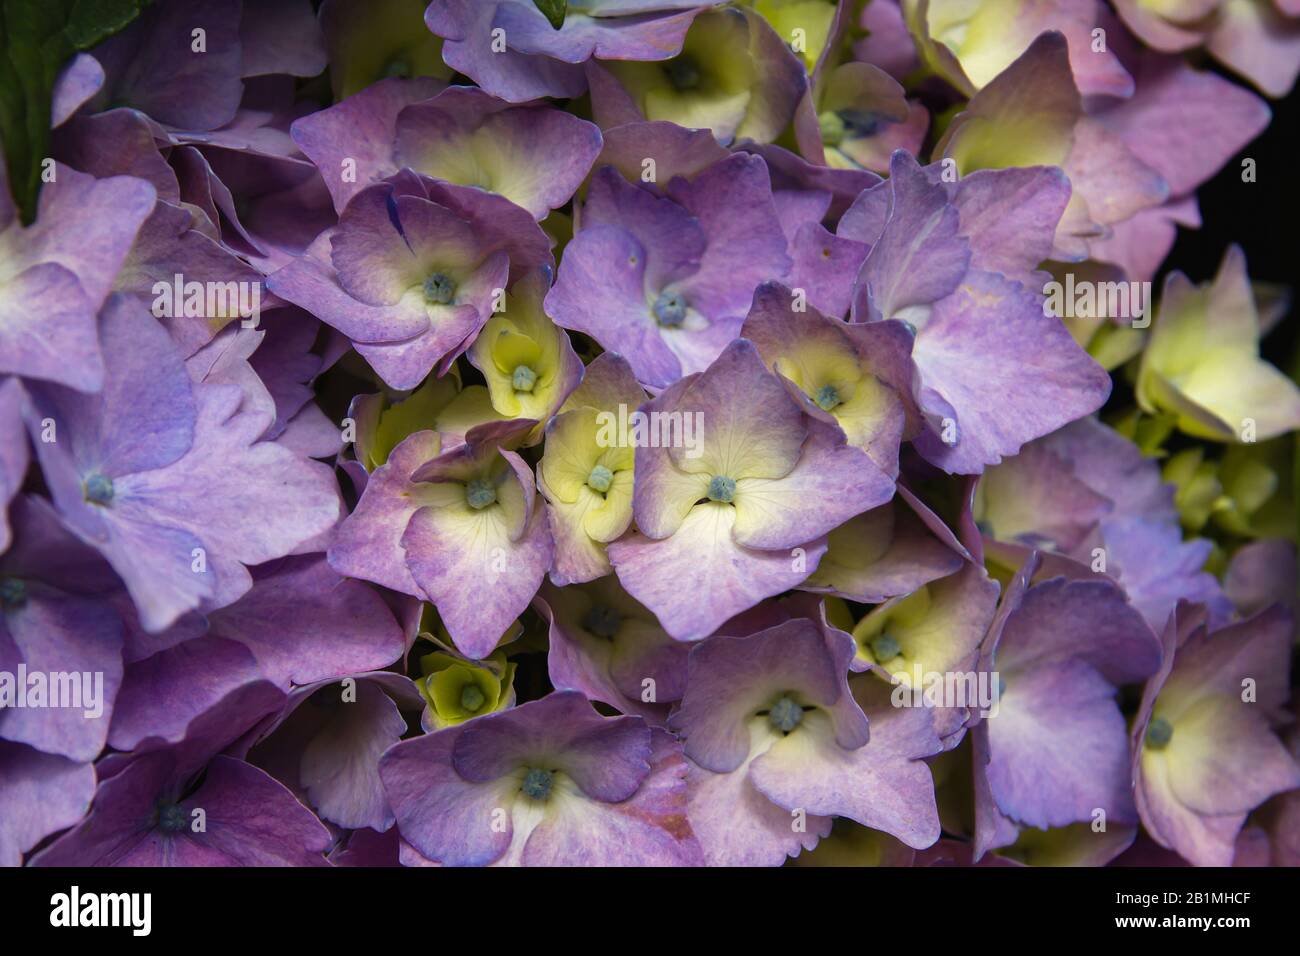 Hydrangea flowers blooming in spring Stock Photo